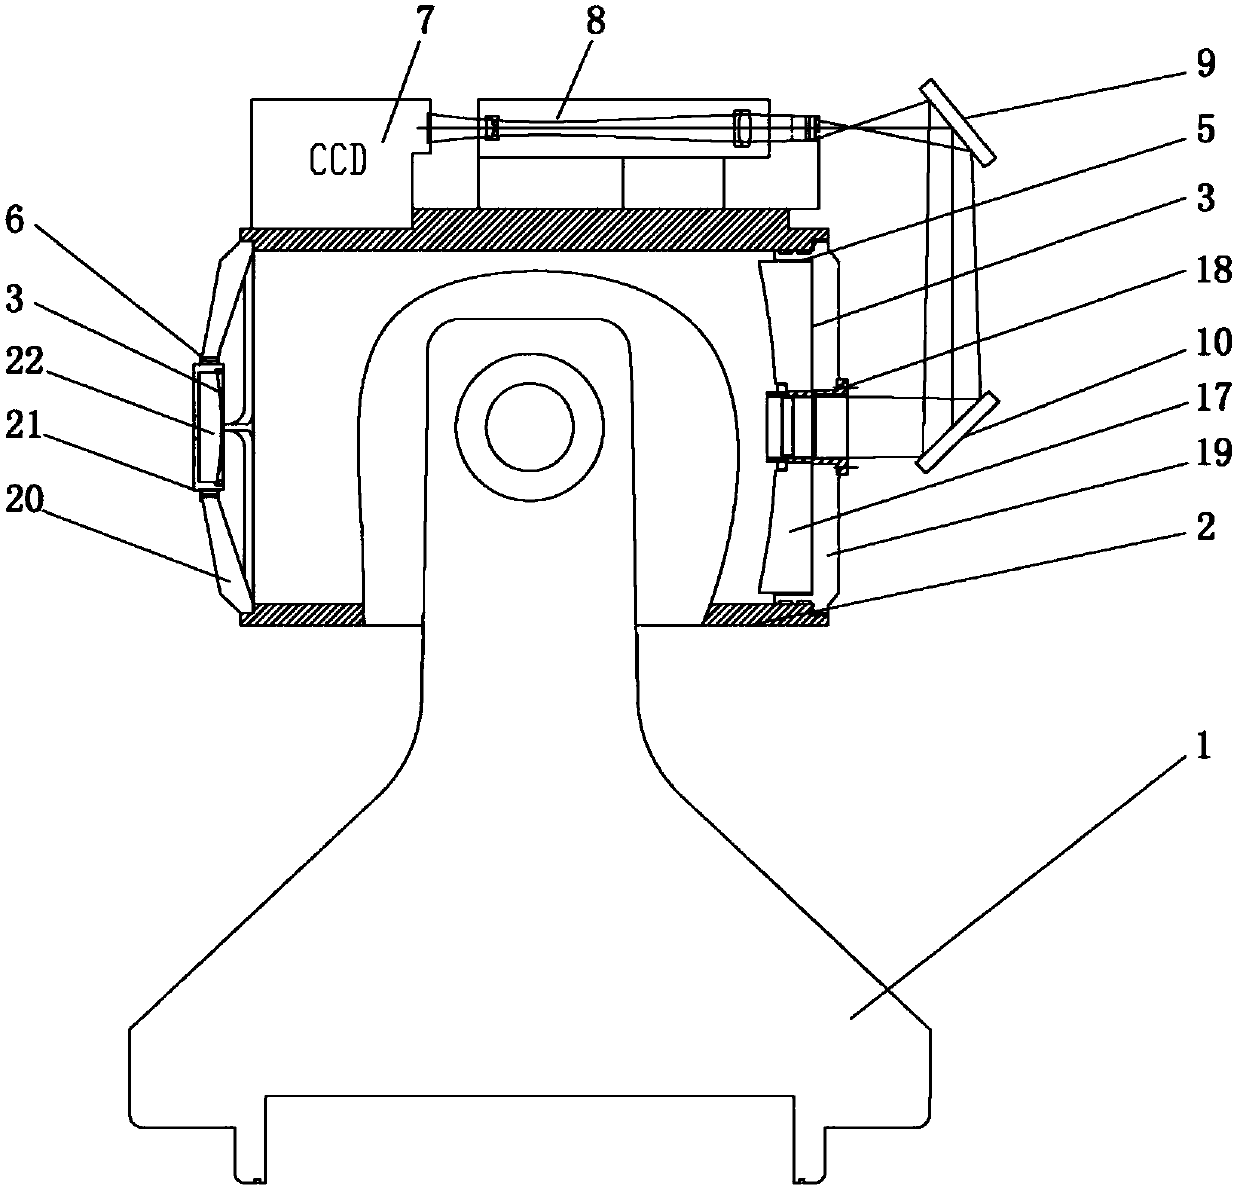 A method for adjusting the collimation error of horizon-type theodolite